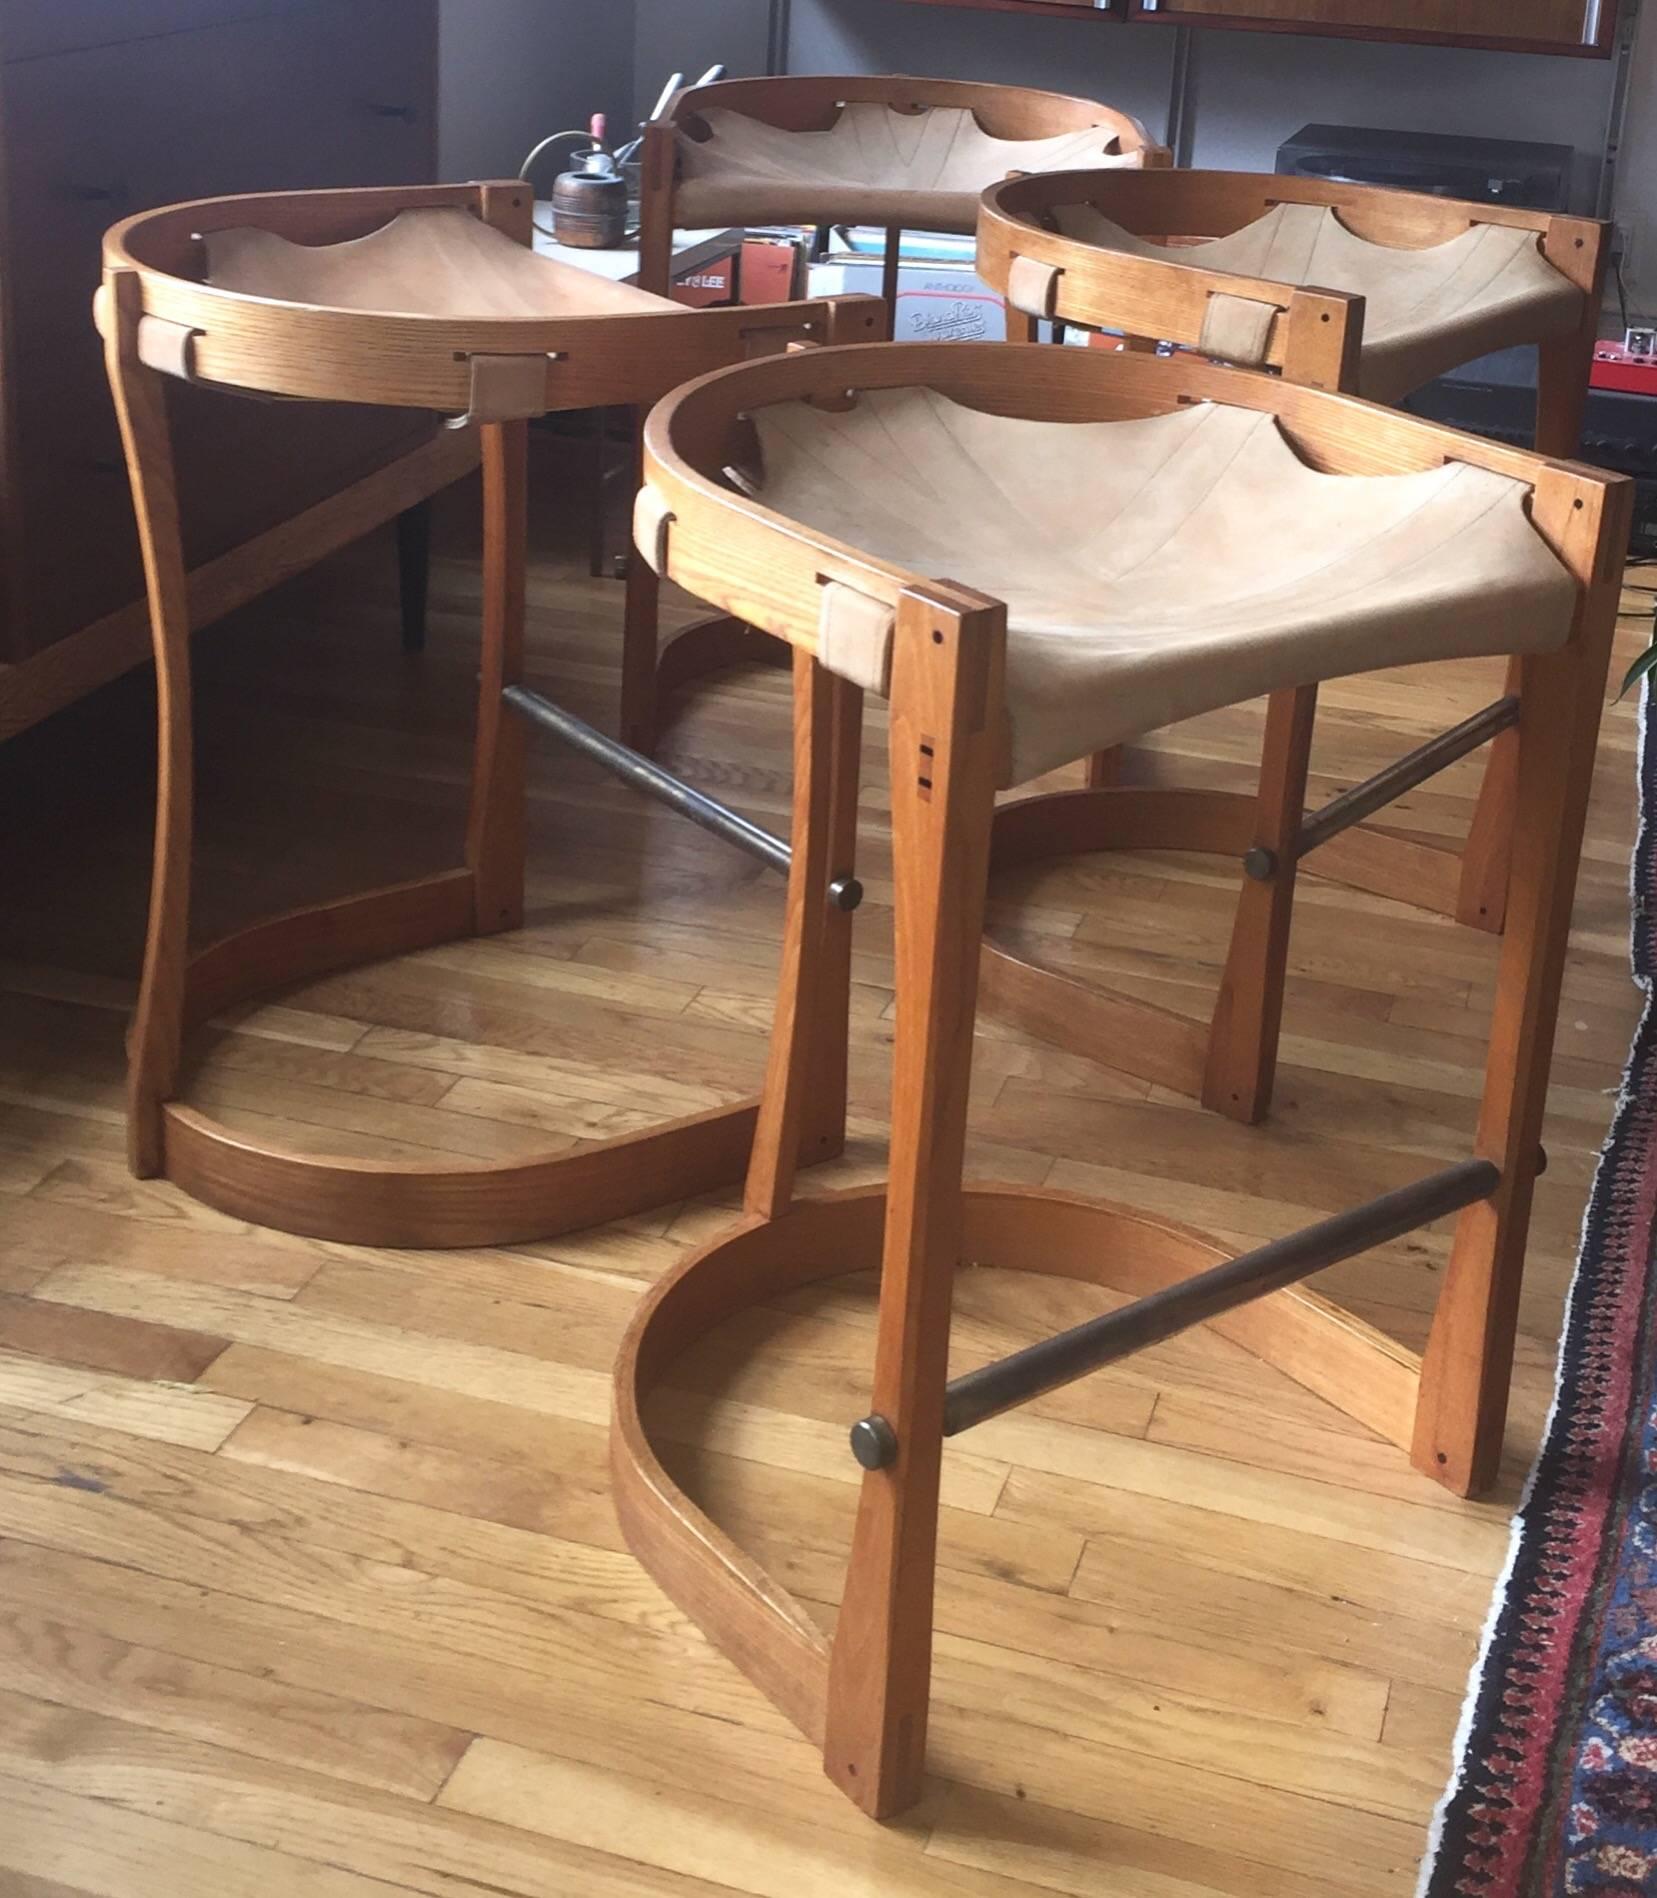 c. 1970 solid bentwood Ash stools with stitched saddle leather sling seats.  Remarkable build quality and subtle details, such as peg and dovetail construction with exposed ebony wood pegging, solid brass foot rests, and intricate  wood carving. The